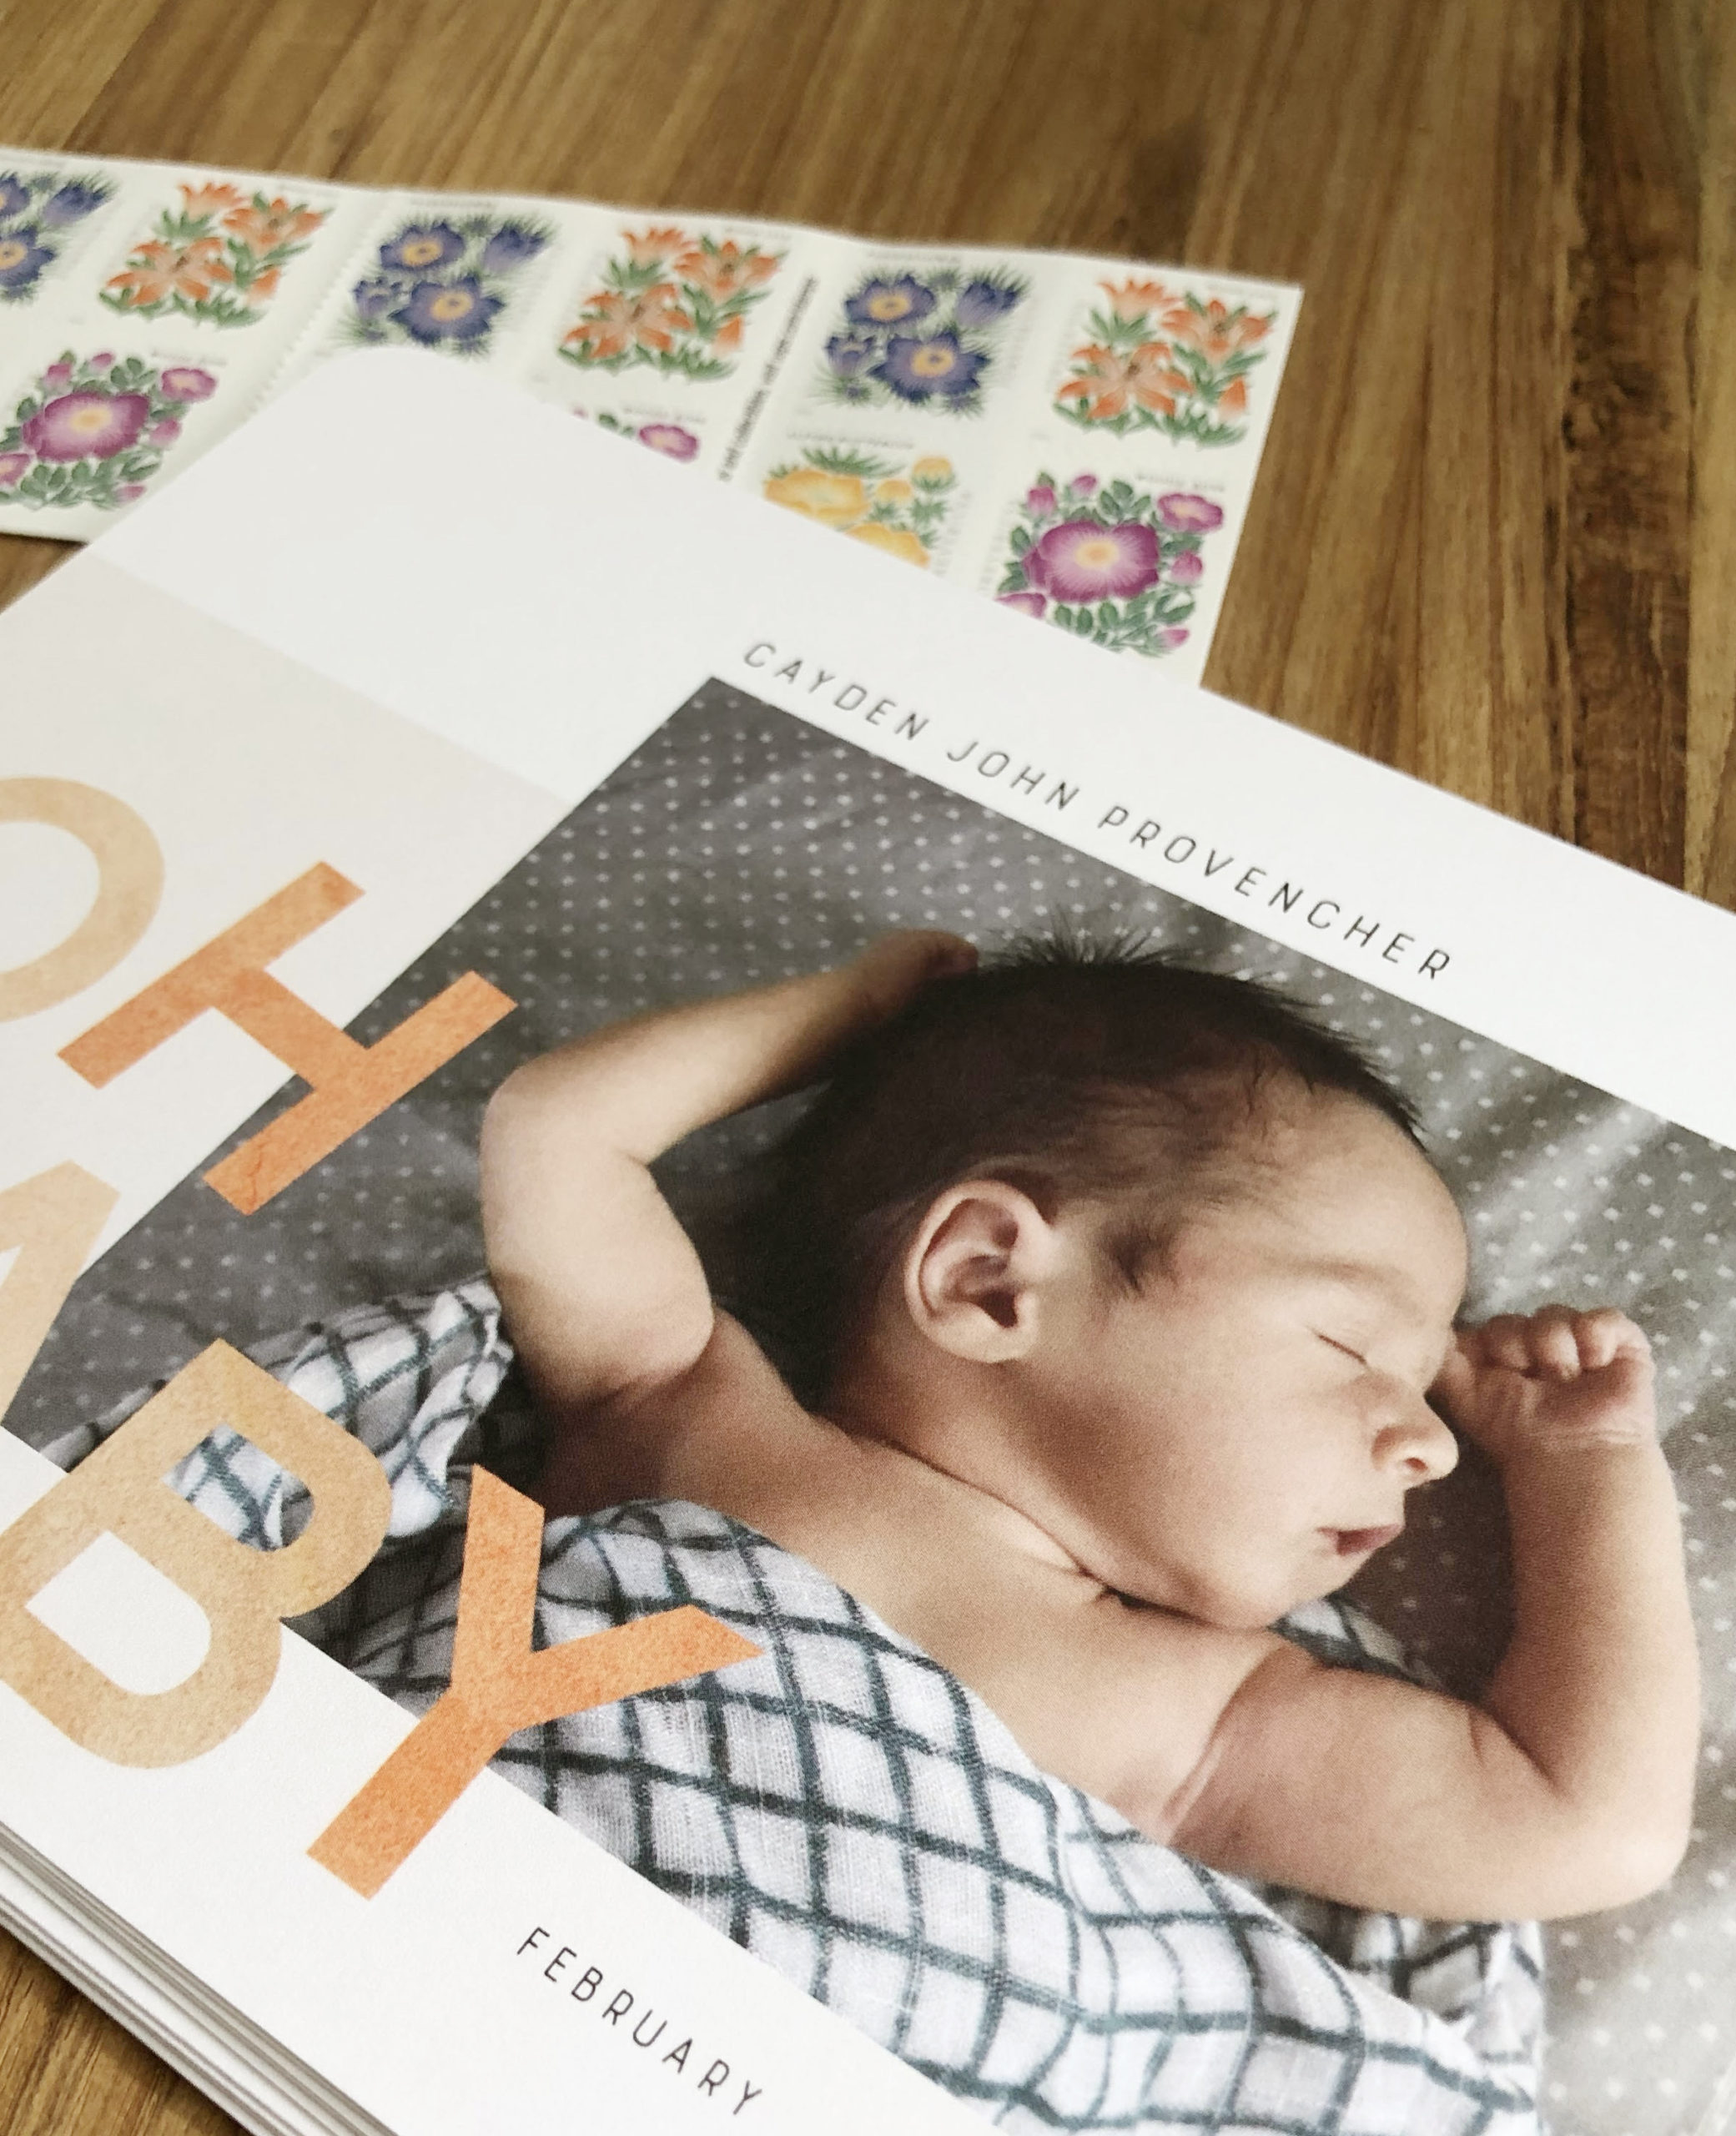 Newborn Photo Ideas + Tips For Taking Your Own Photos /// By Design Fixation #photo_ideas #newborn #baby_photos #birth_announcements